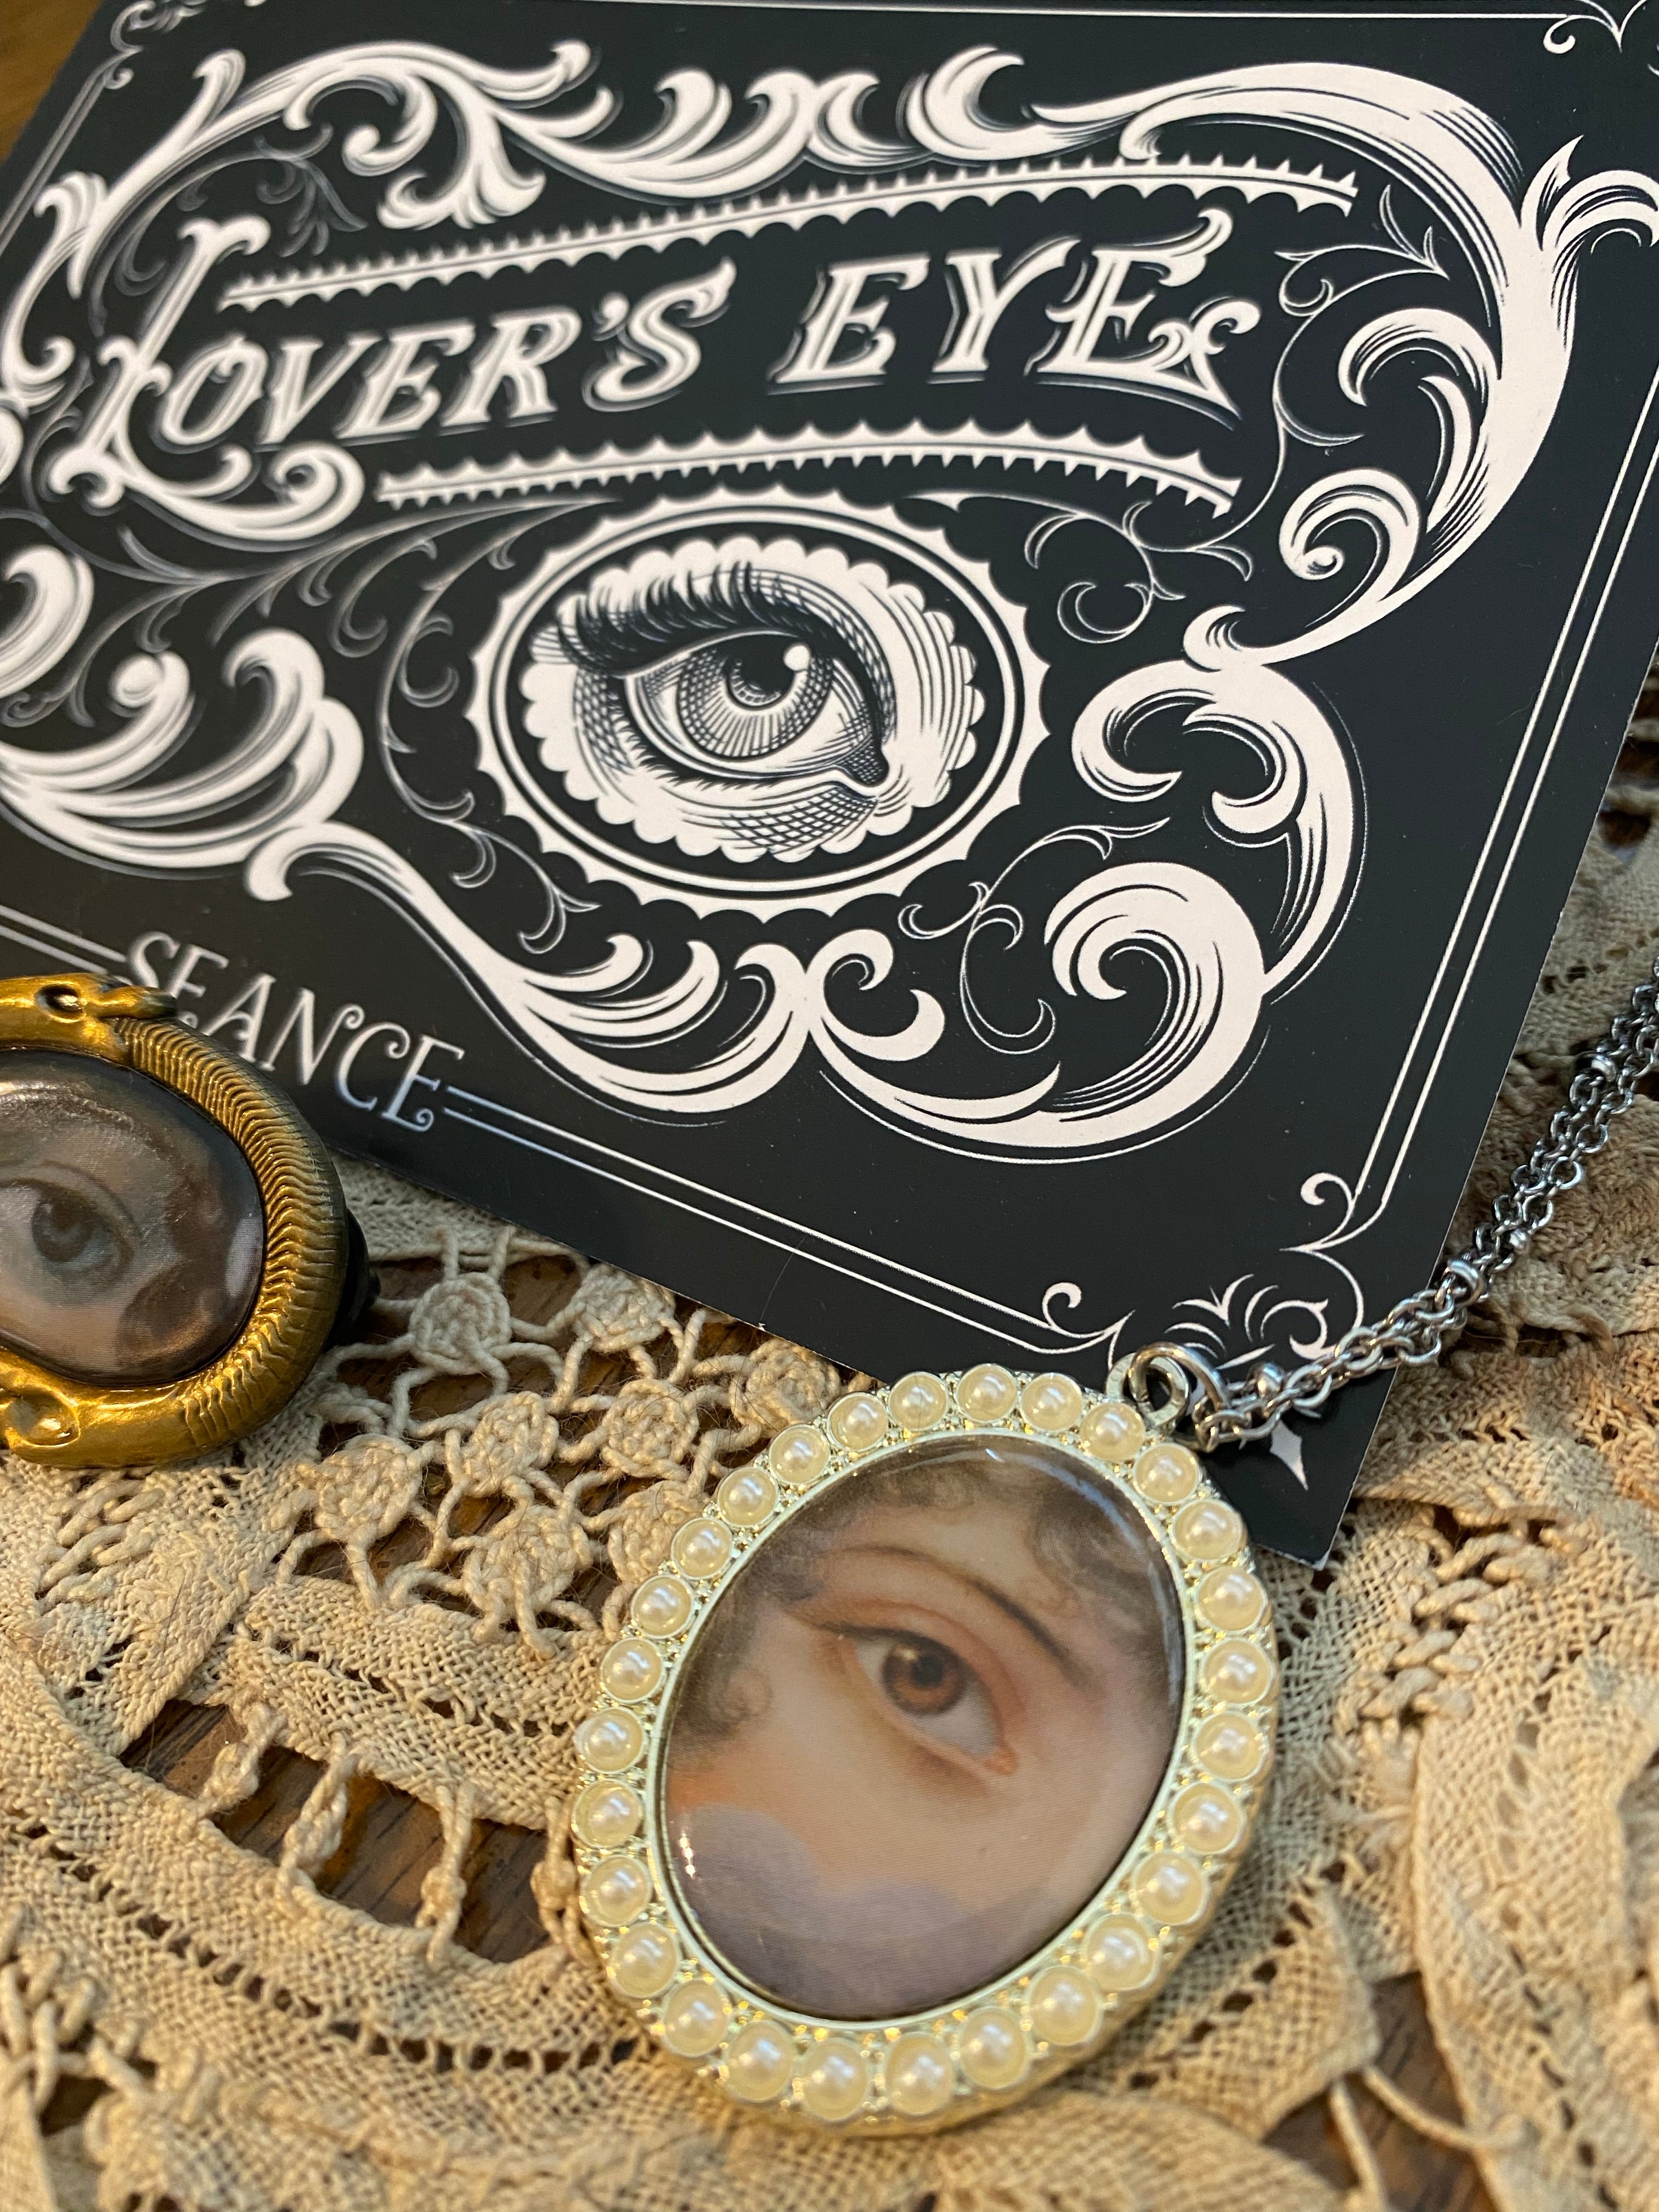 LOVERS EYE necklace- Evelyn